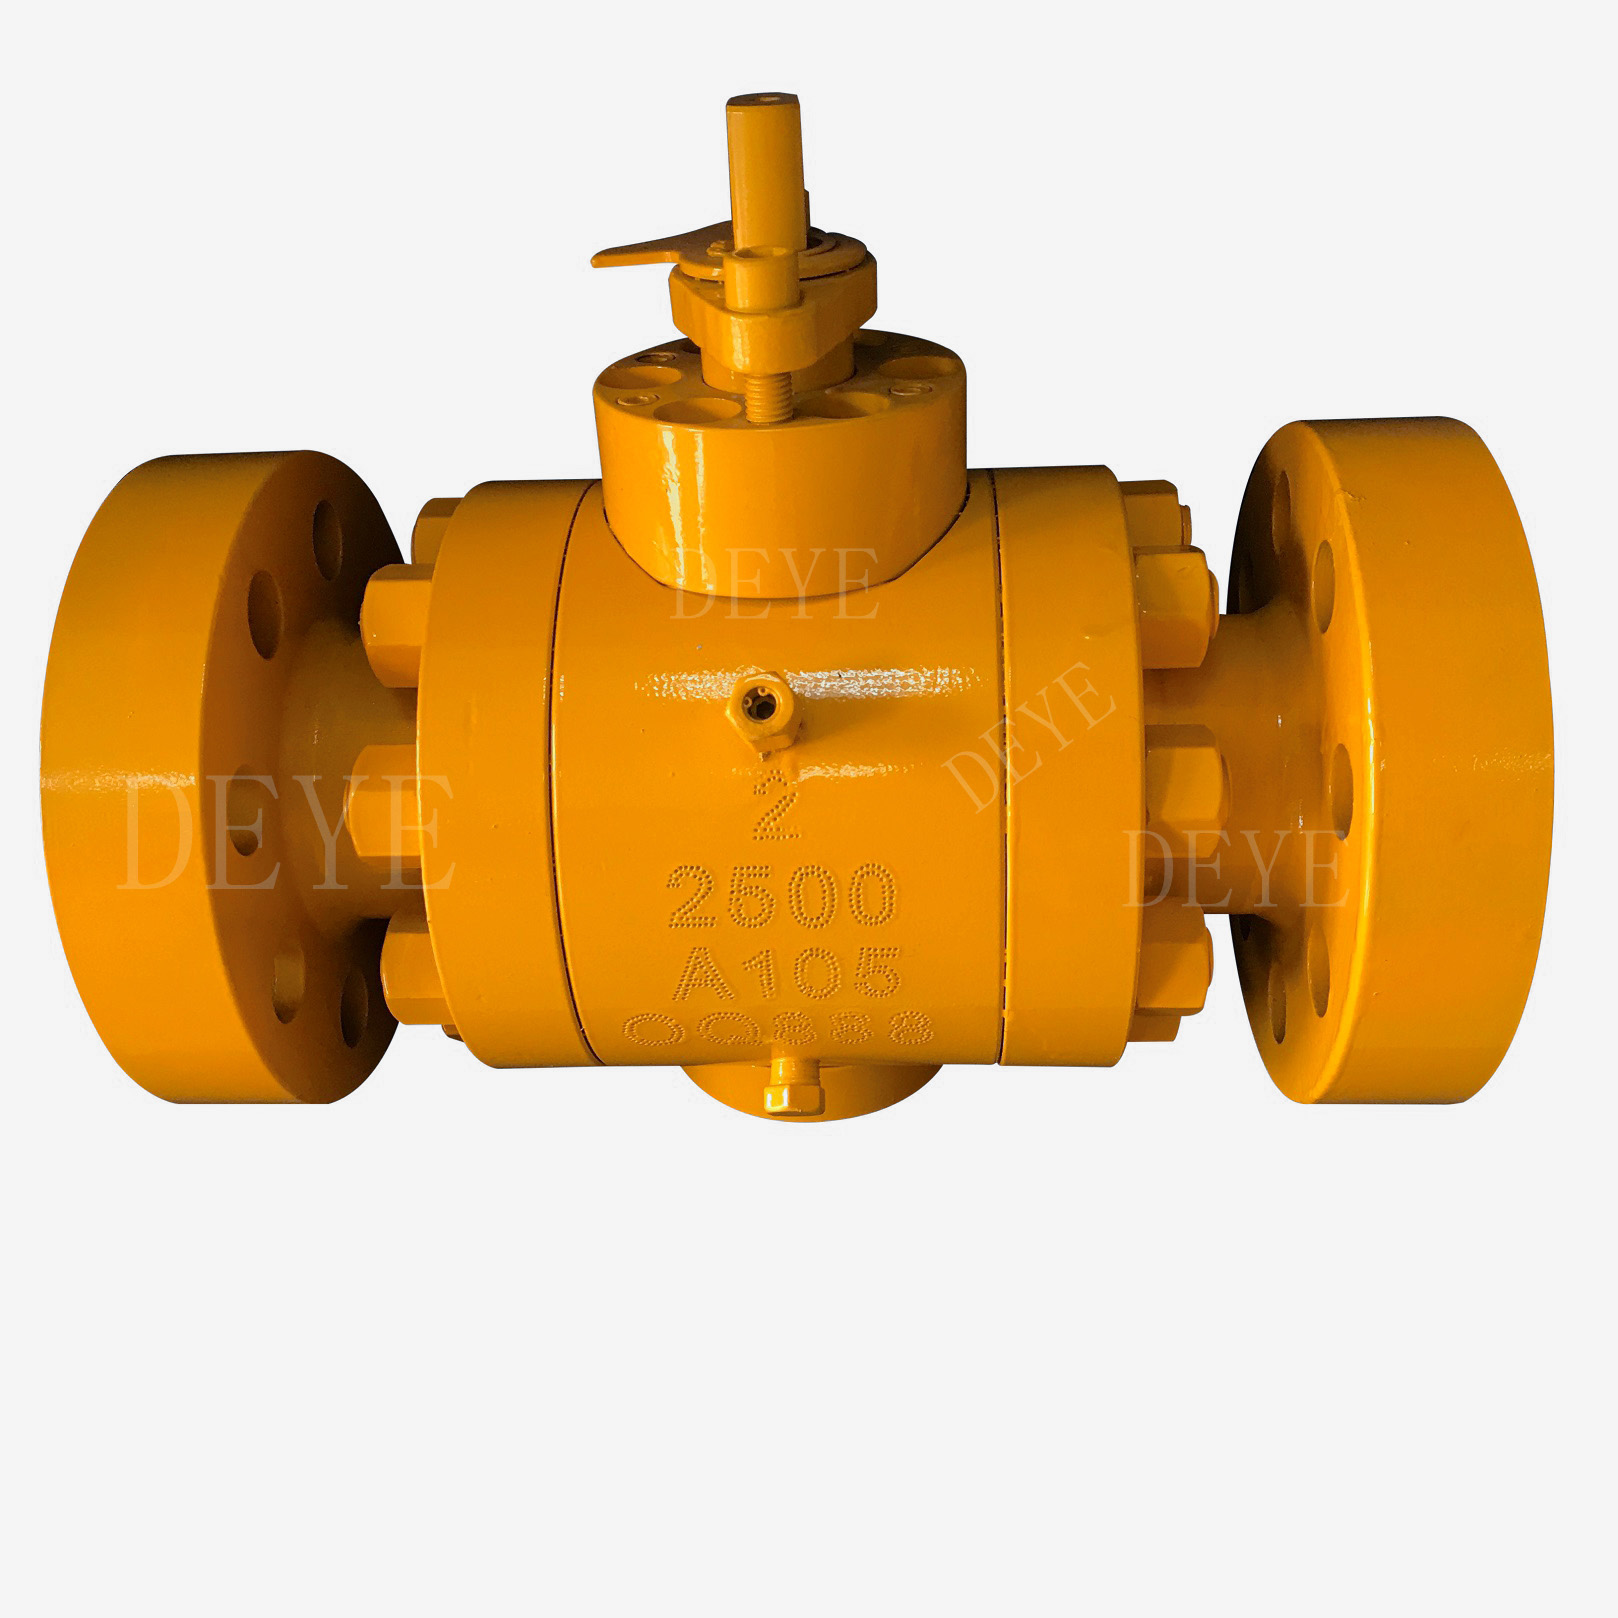 High pressure flanged 2500LBS ball valve for LNG use (BV-02500-2F  )